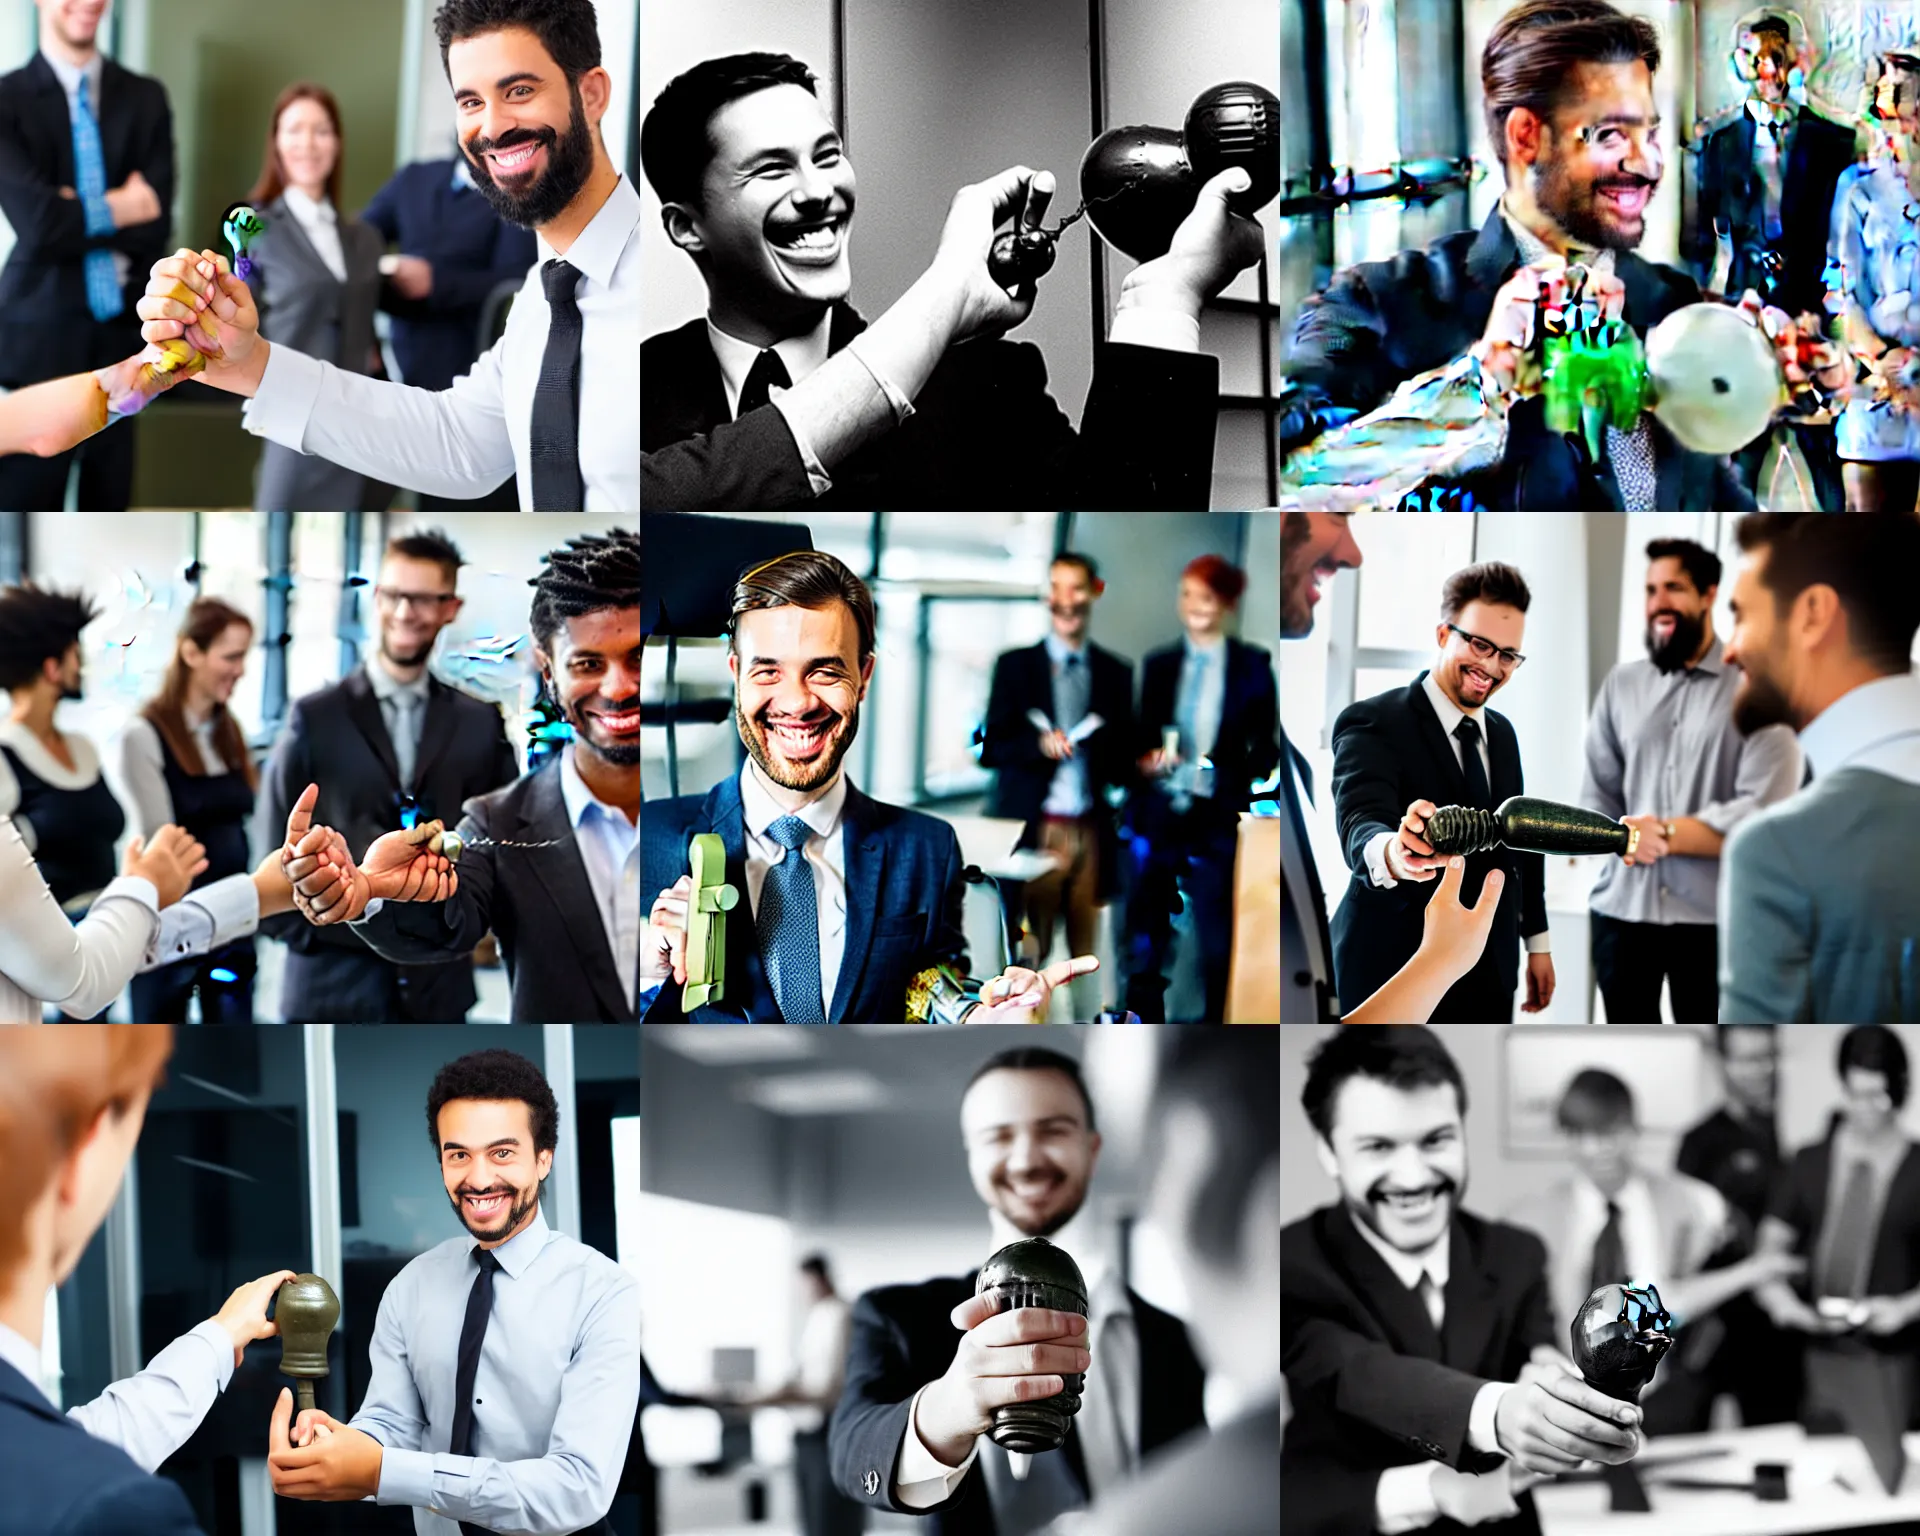 Prompt: photograph of an office worker smiling and holding a hand grenade at work, his coworkers are staring at him in fear